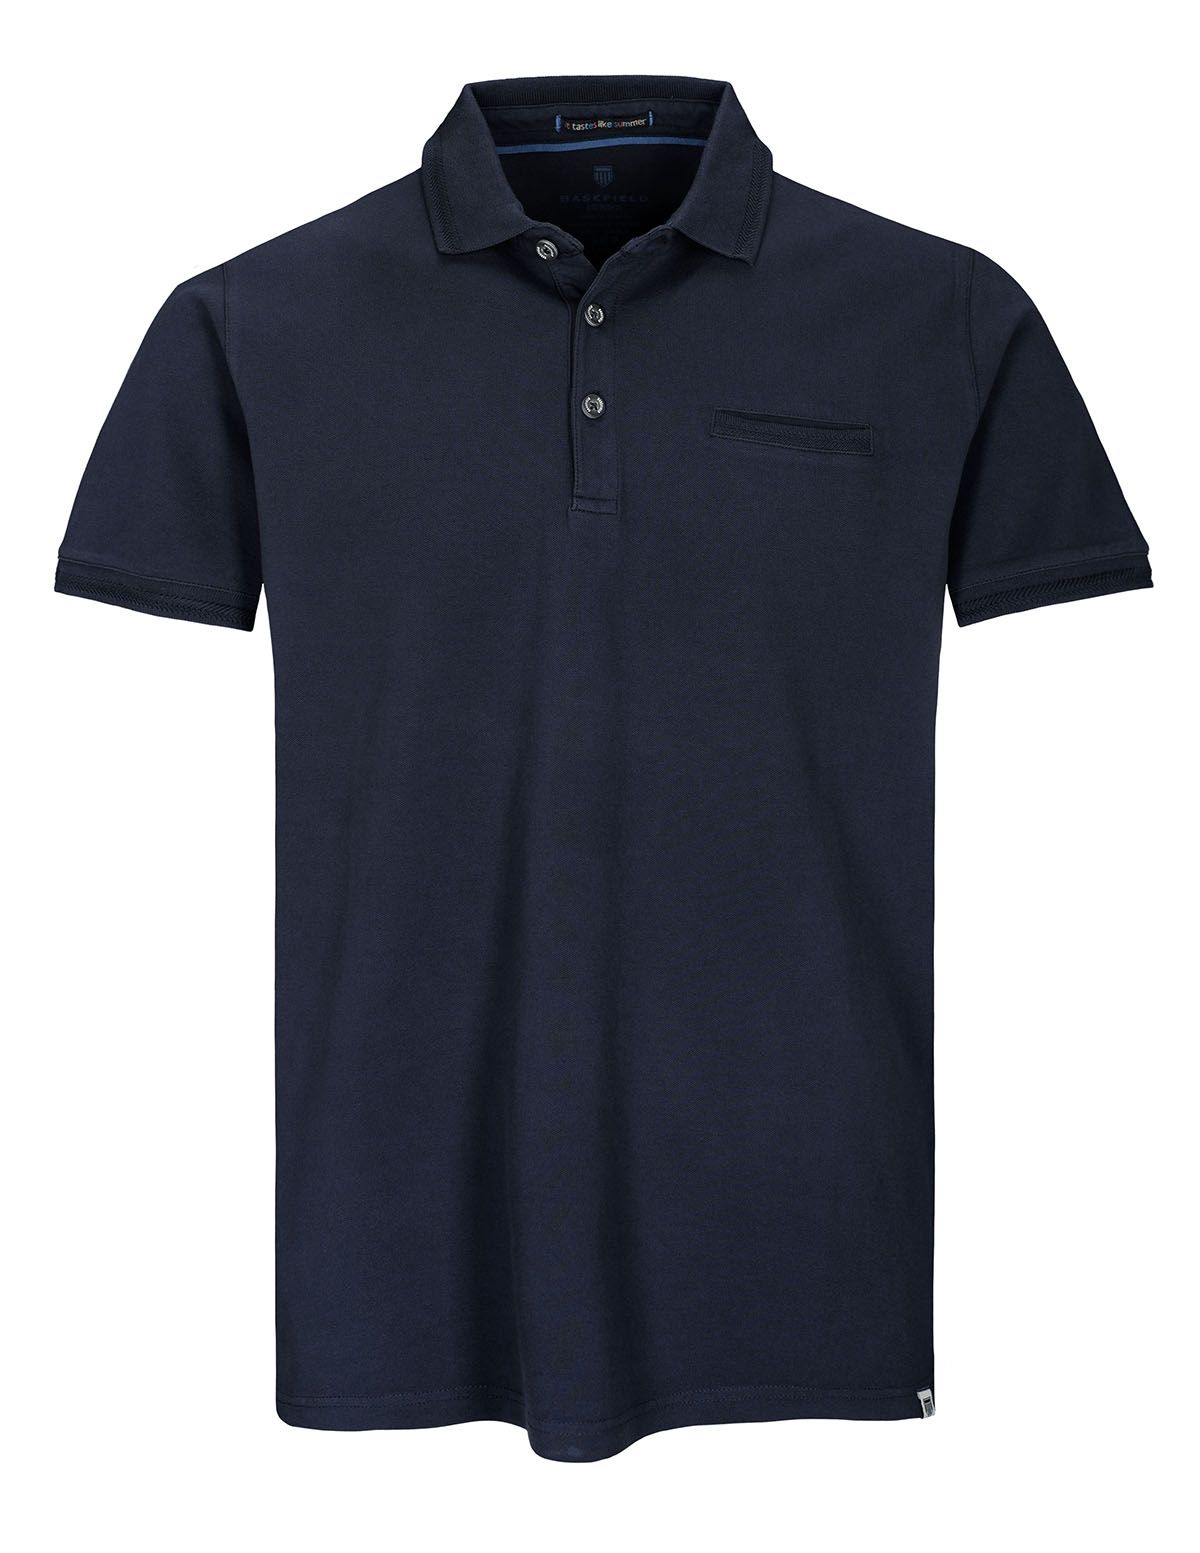 Polo Shirt mit Struktur-Muster